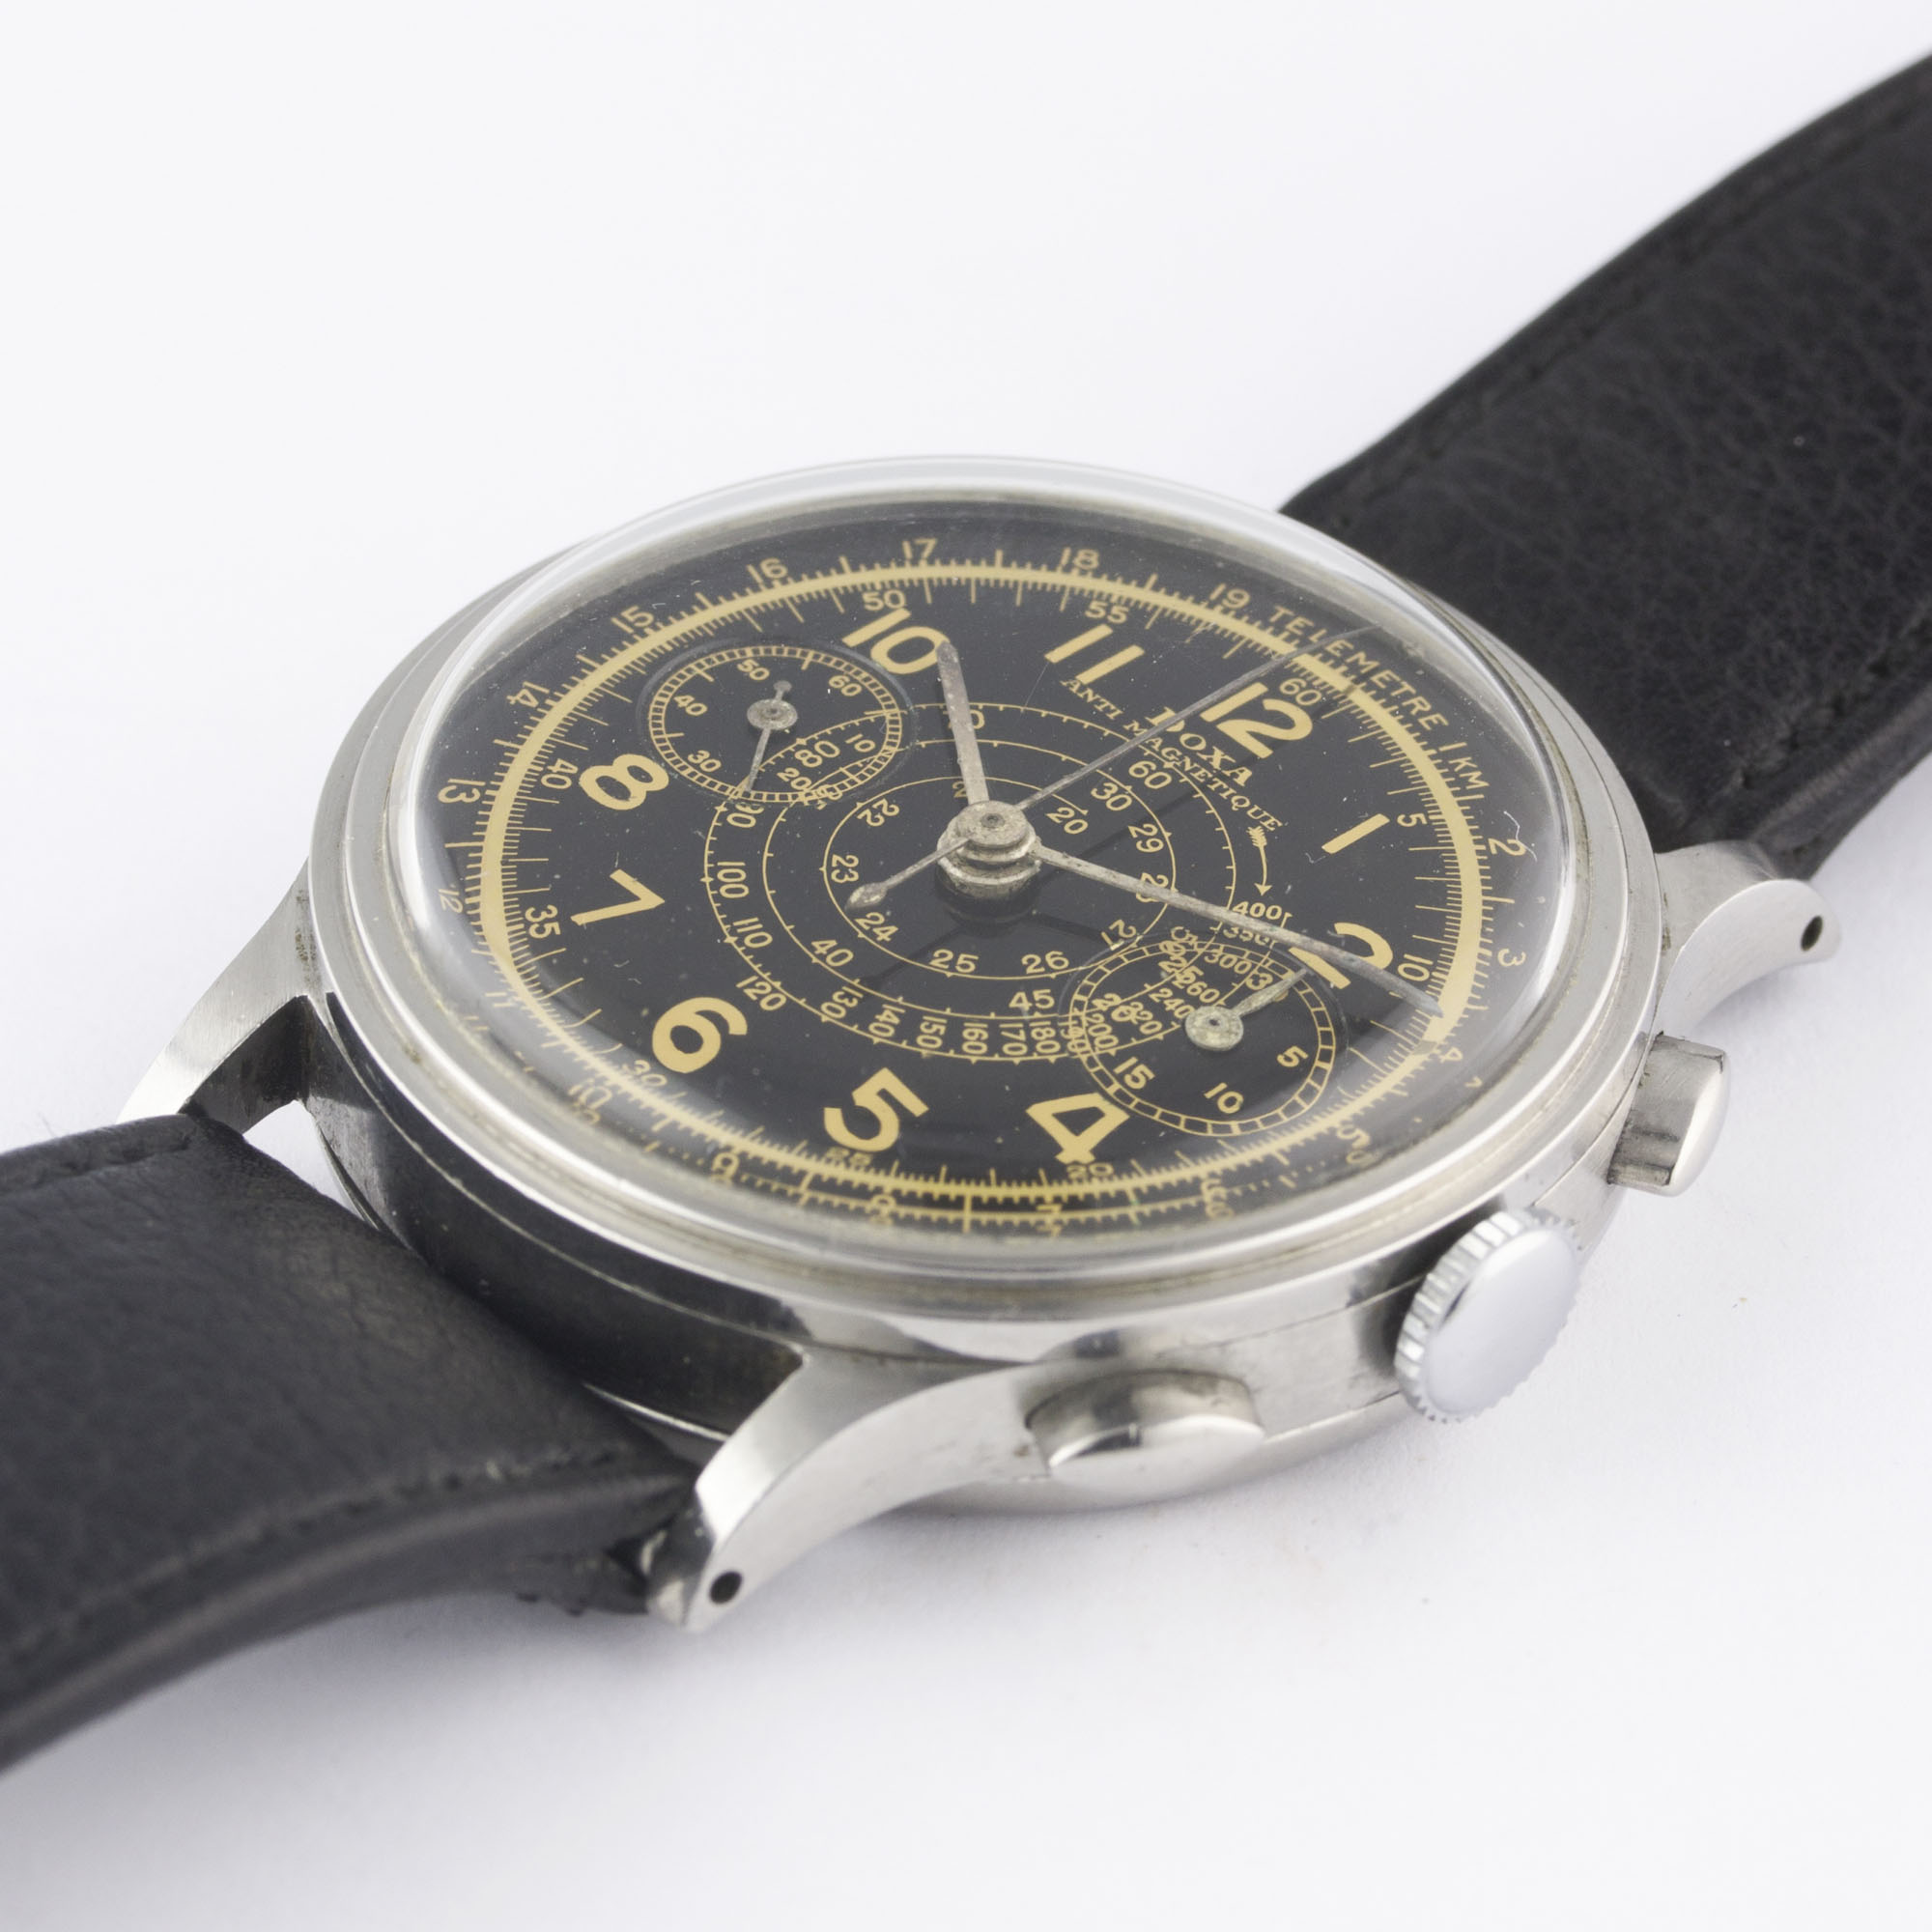 A RARE GENTLEMAN'S LARGE SIZE STAINLESS STEEL DOXA CHRONOGRAPH WRIST WATCH CIRCA 1940s, WITH GLOSS - Image 4 of 11